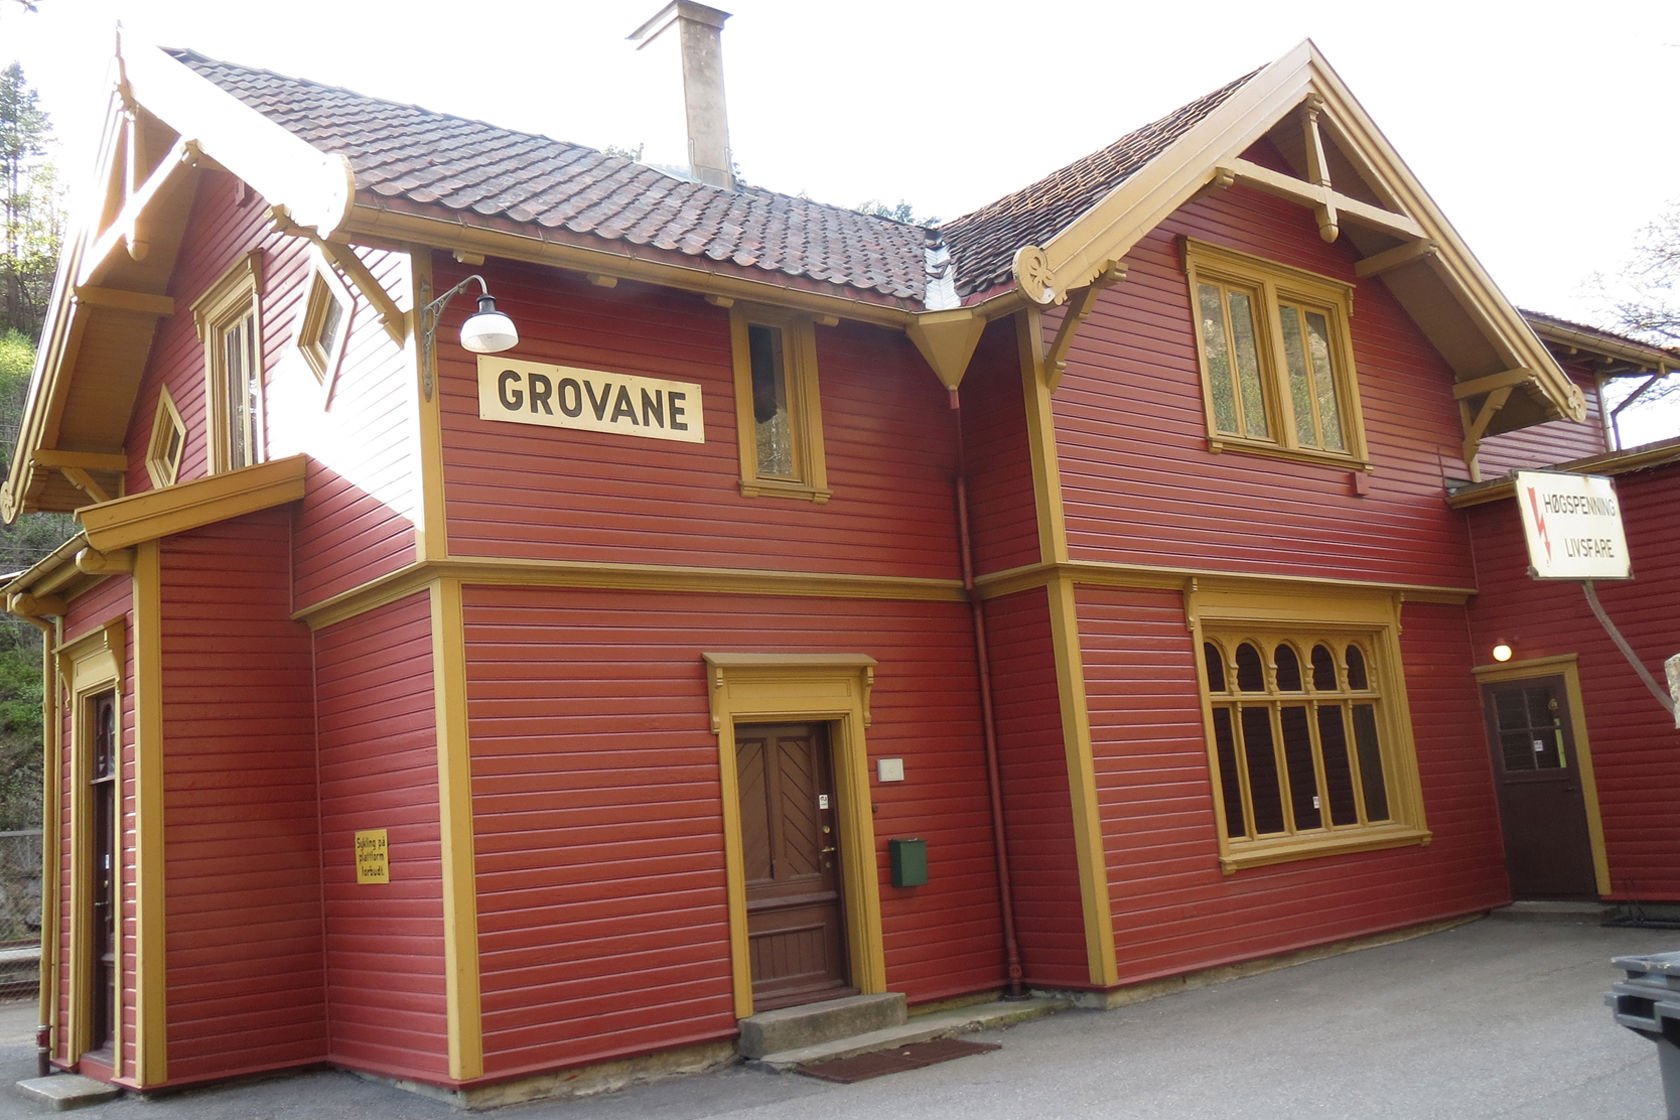 The station building at Grovane station